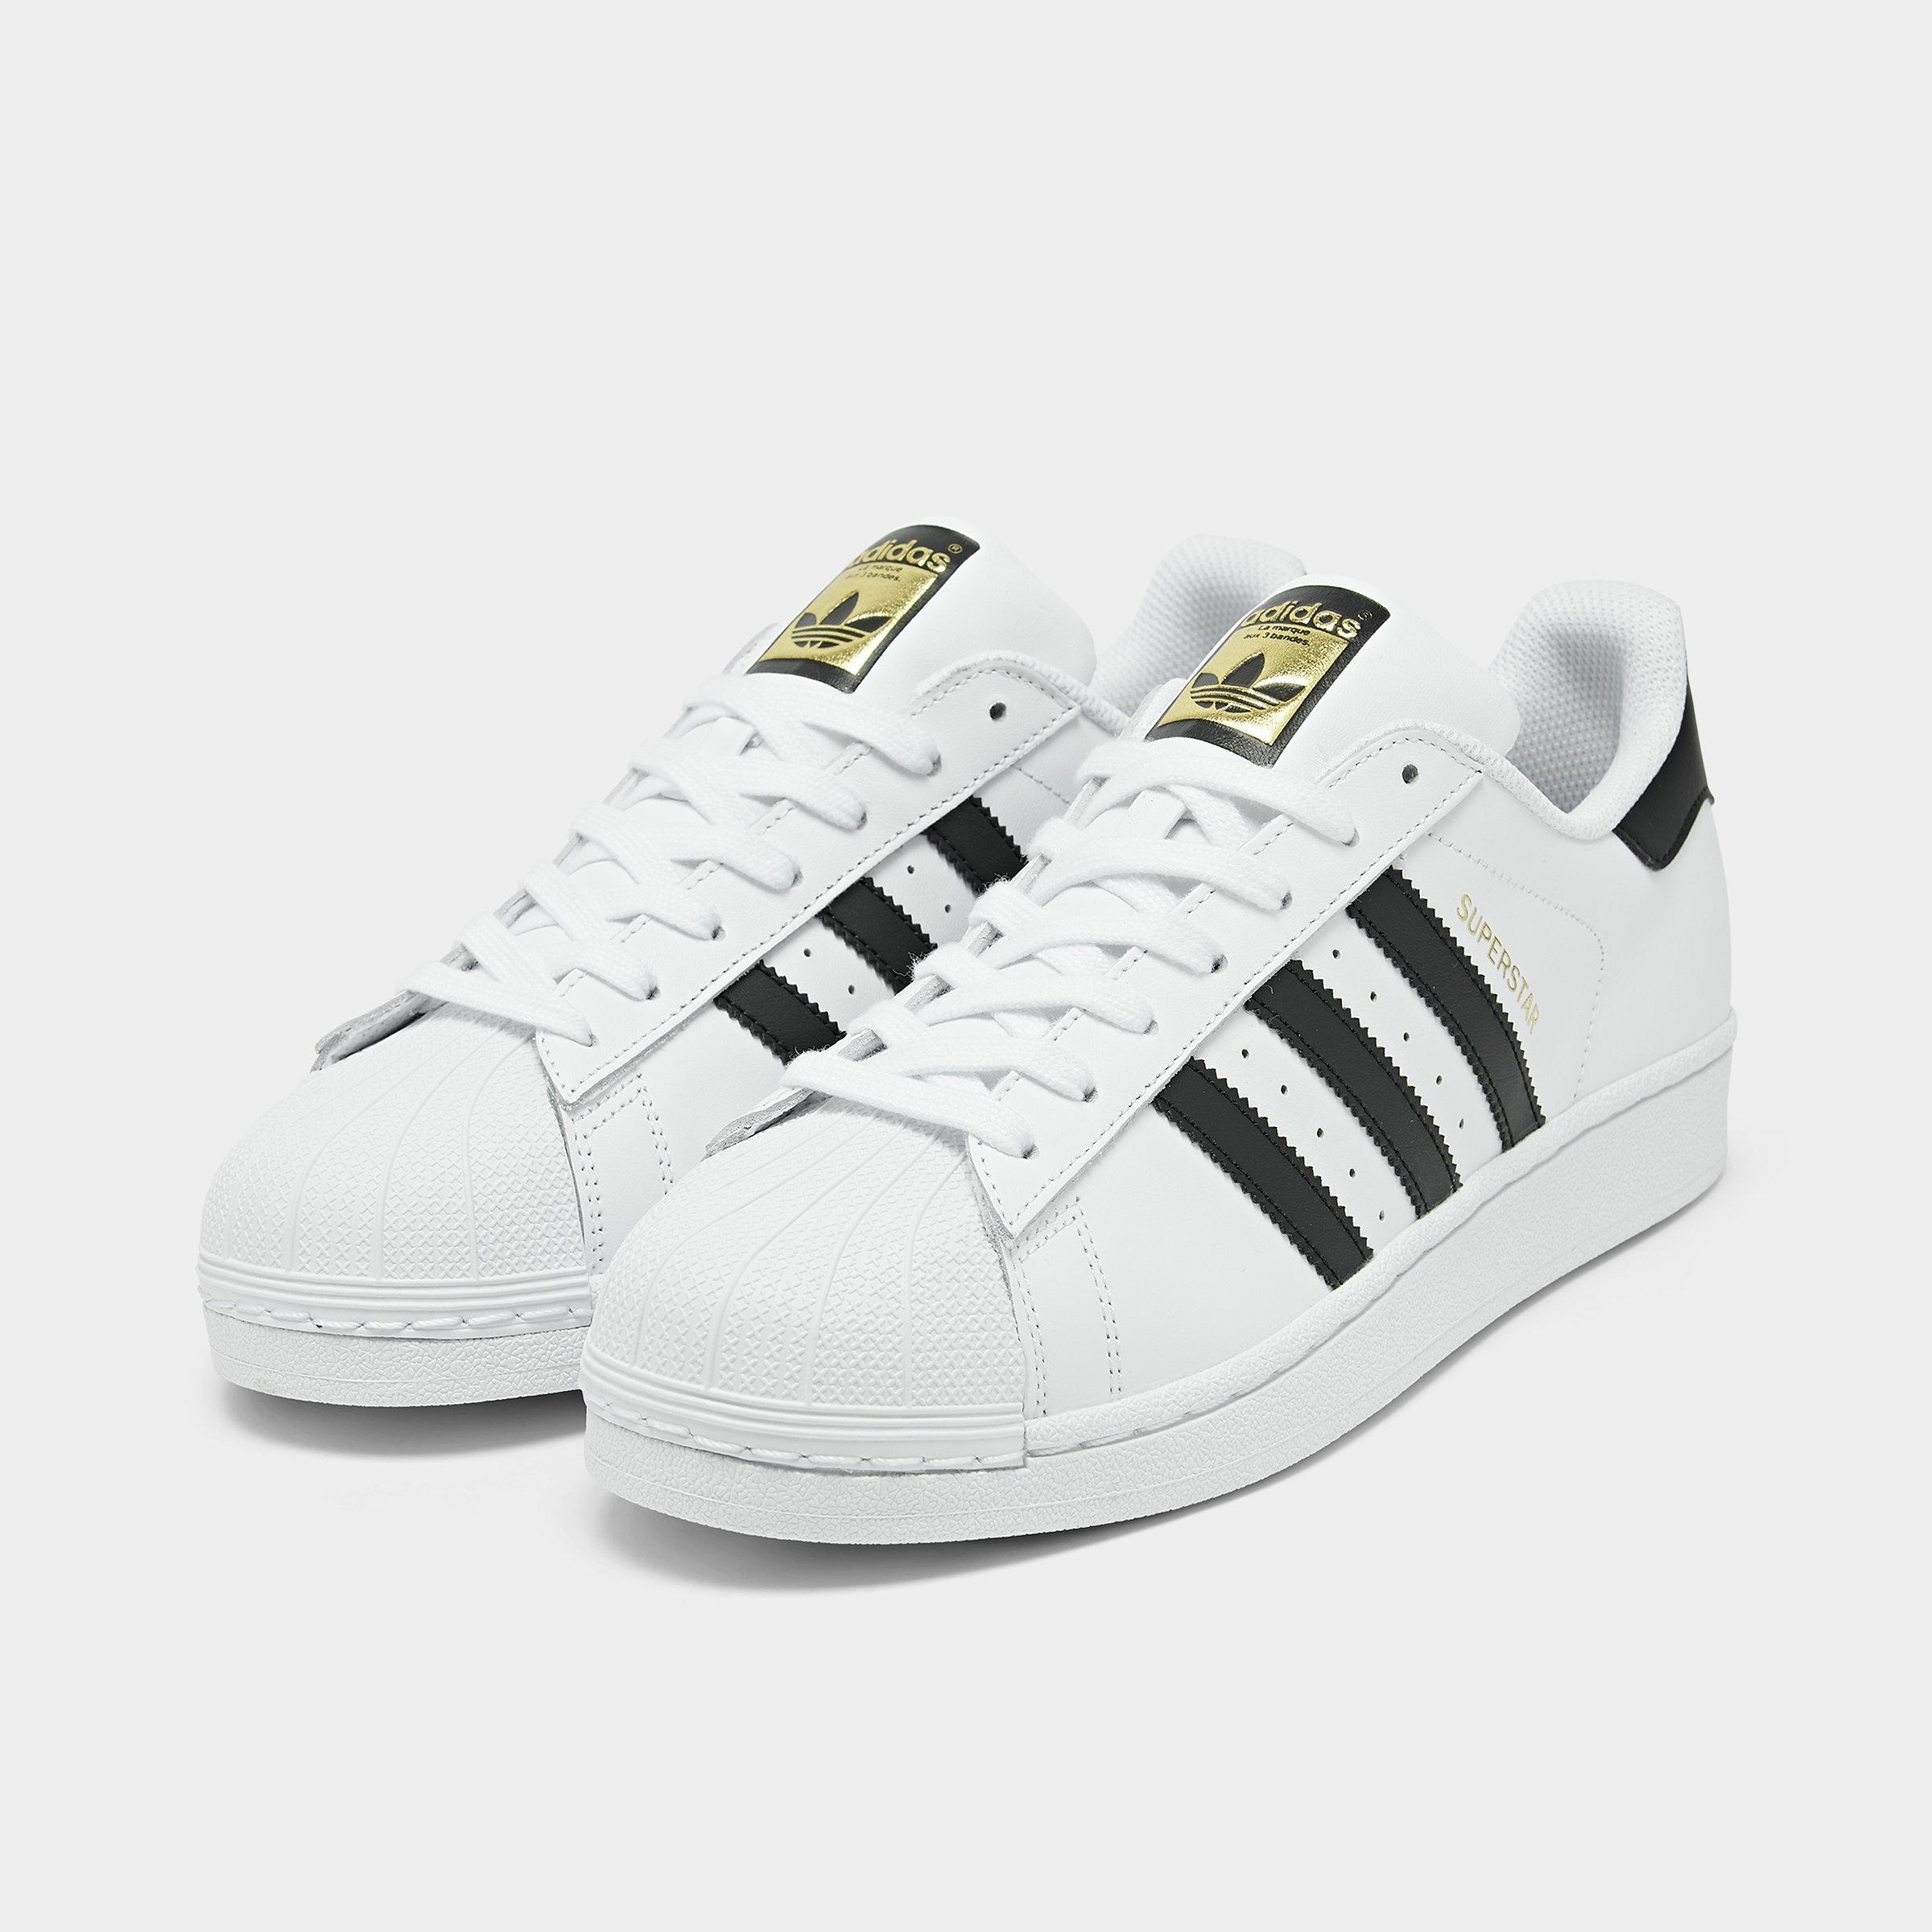 adidas all star black and gold